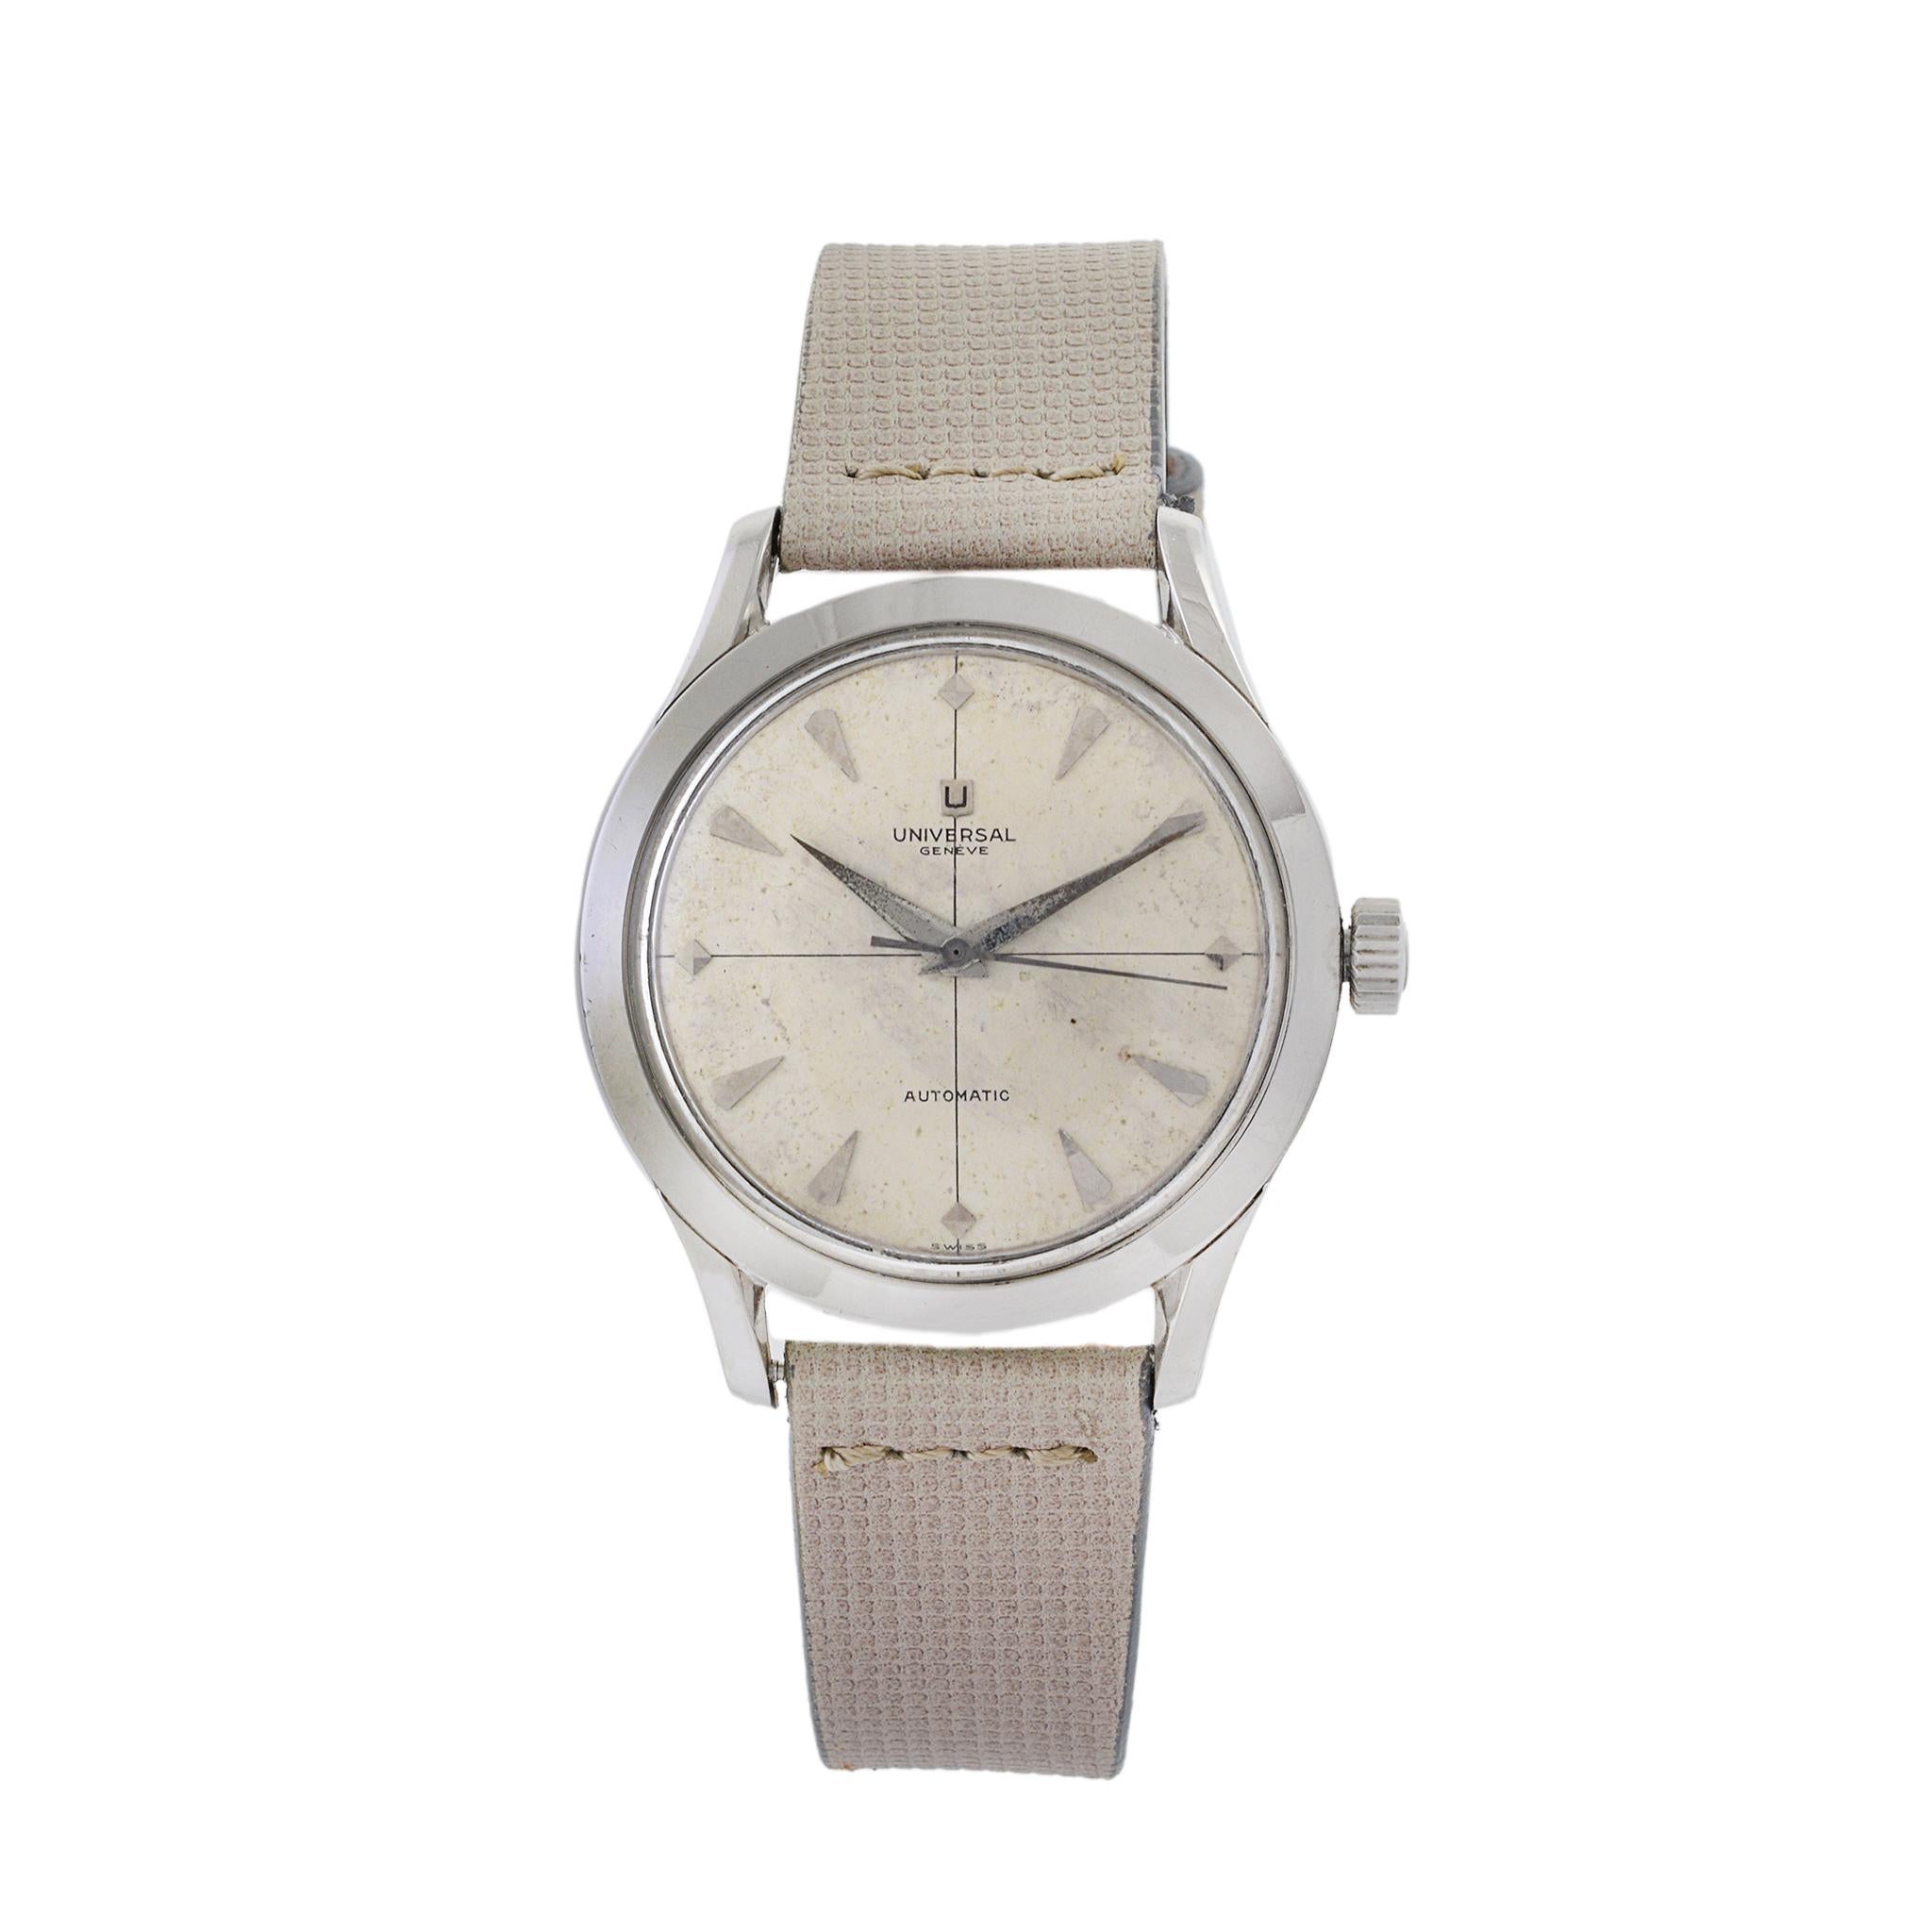 Universal Genève is more well known for its sports models, but they were also proud makers of beautiful and interesting dress watches. With clear 1950s style, the case has a clean and straightforward case design with a wide-set bezel that adds to